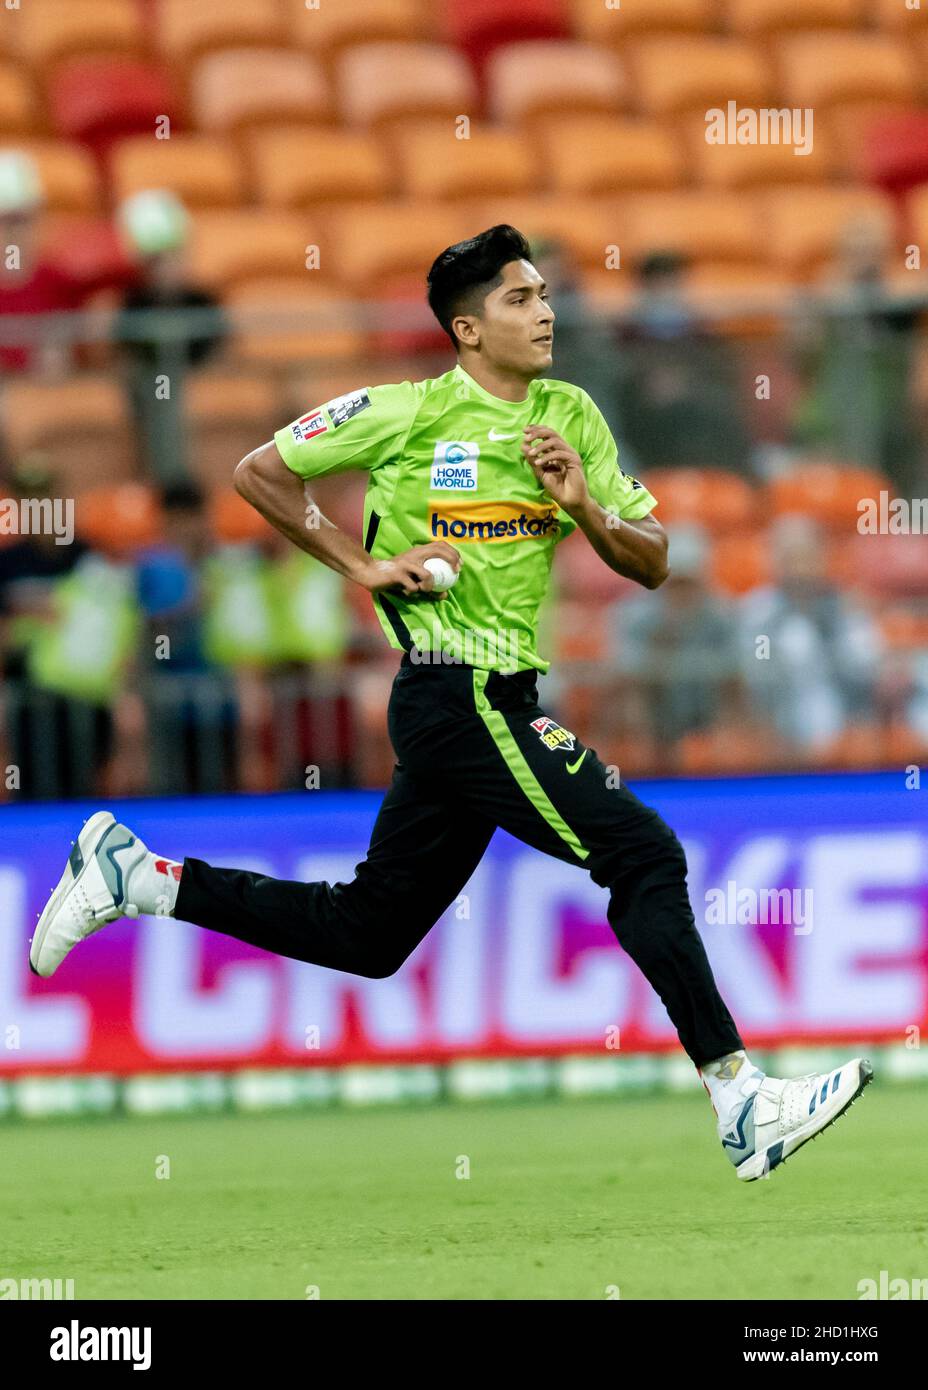 Sydney, Australia. 02nd Jan, 2022. Mohammad Hasnain of Thunder bowls during the match between Sydney Thunder and Adelaide Strikers at Sydney Showground Stadium, on January 02, 2022, in Sydney, Australia. (Editorial use only) Credit: Izhar Ahmed Khan/Alamy Live News/Alamy Live News Stock Photo